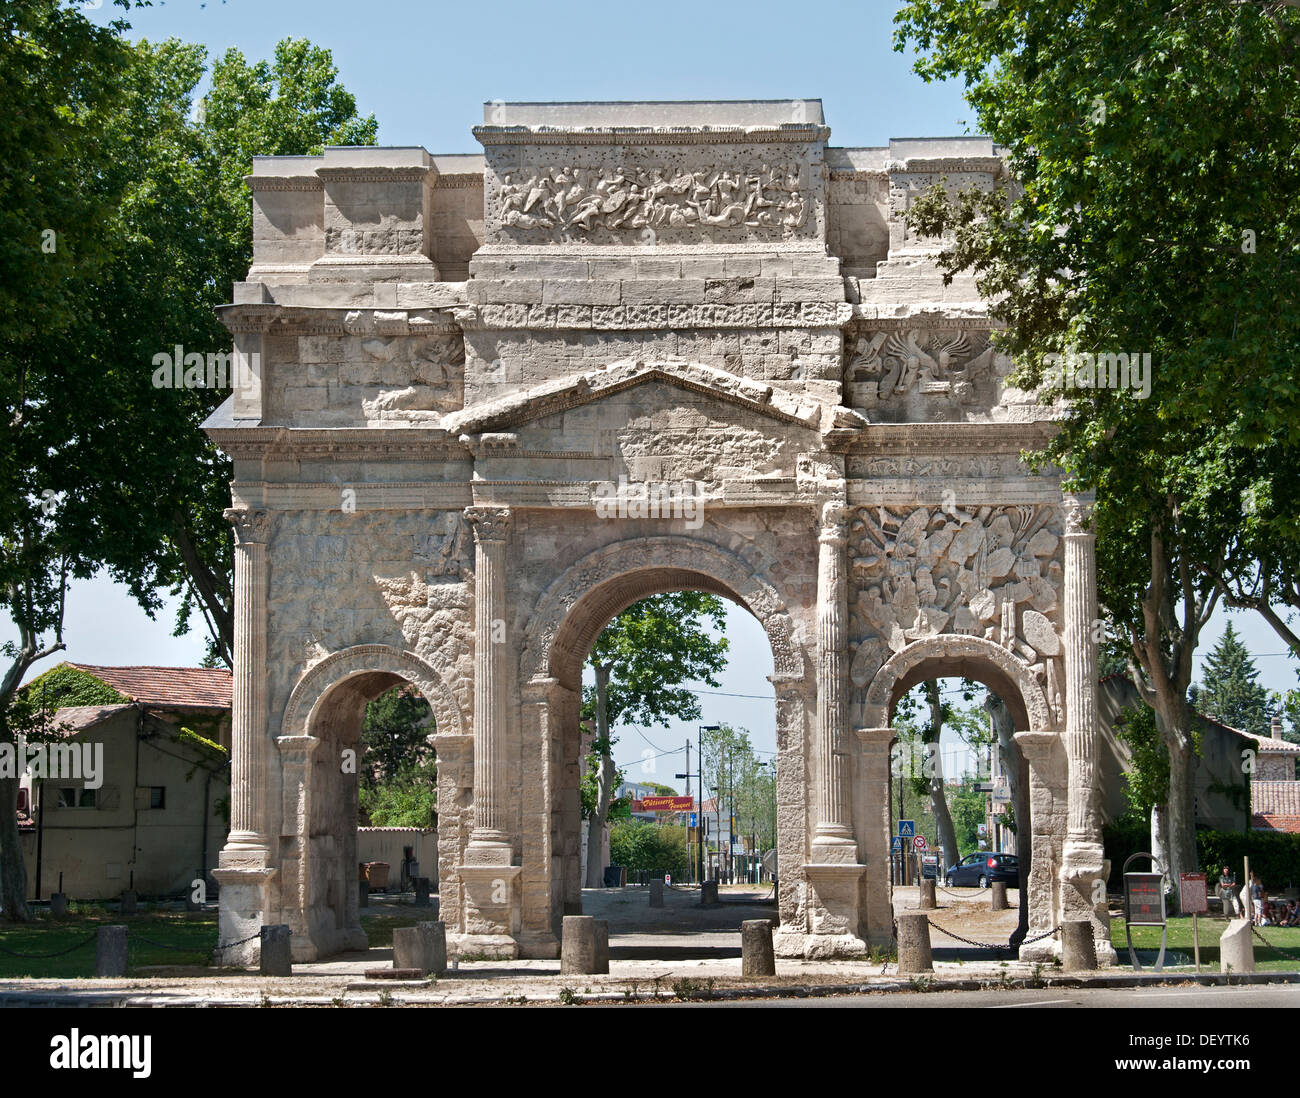 ORANGE Vaucluse Provence The Triumphal Roman Arch1st century AD France French Stock Photo